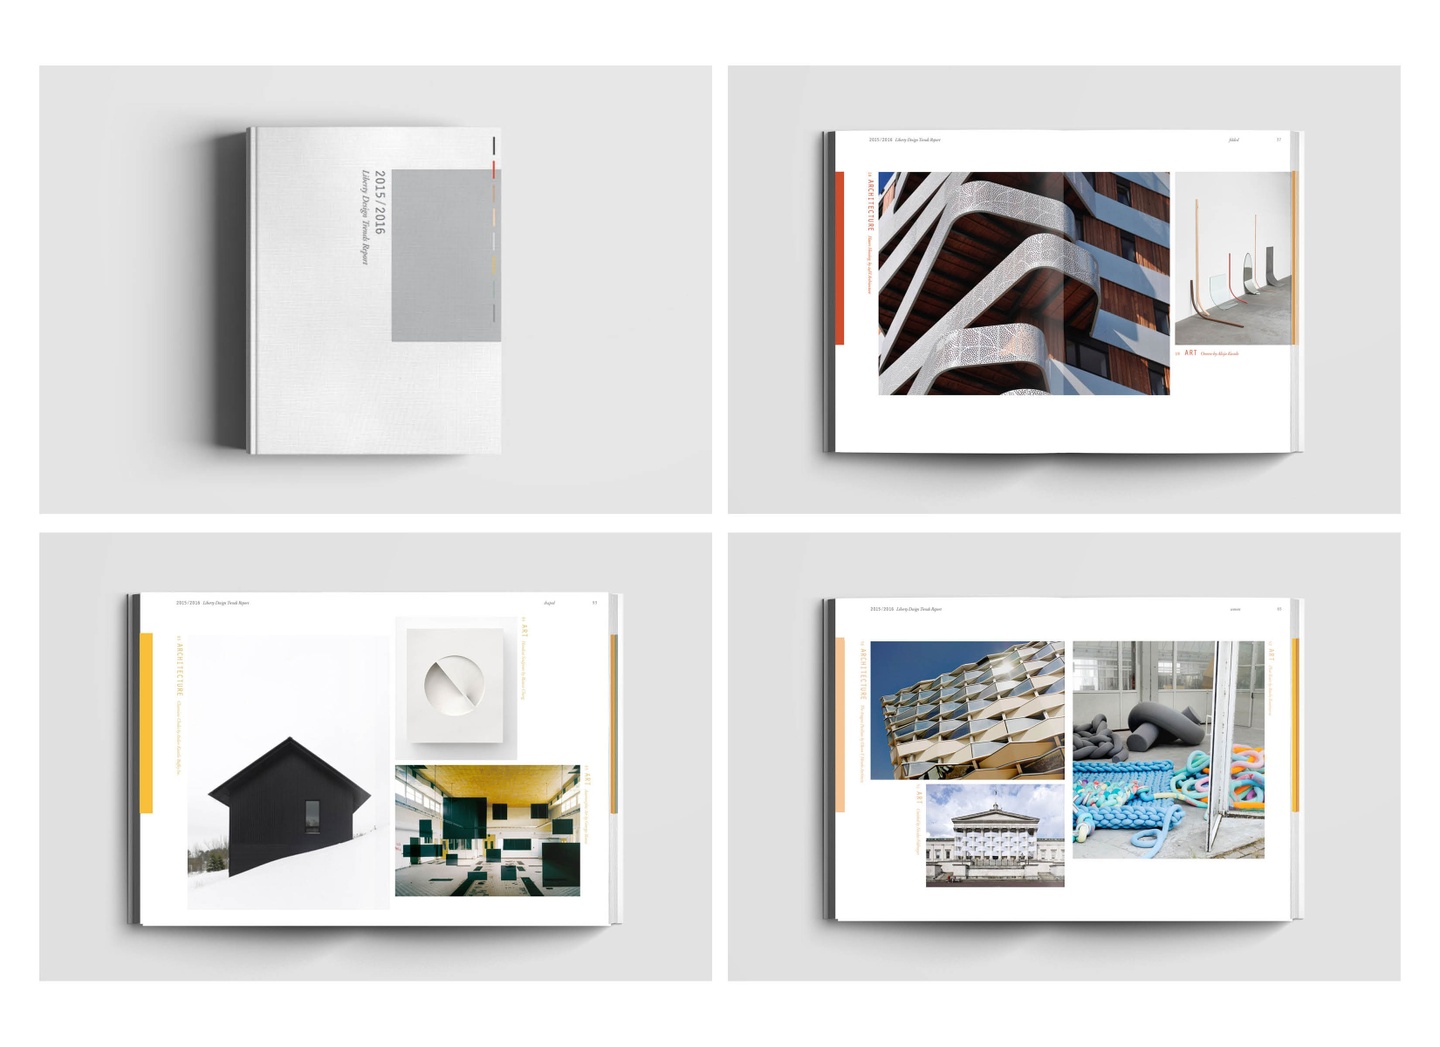 Four images of a book, one of the book's cover and three of internal spreads. The cover depicts intersecting rectangles and the spreads depict several close-up images of architectural elements on buildings paired with internal installations.